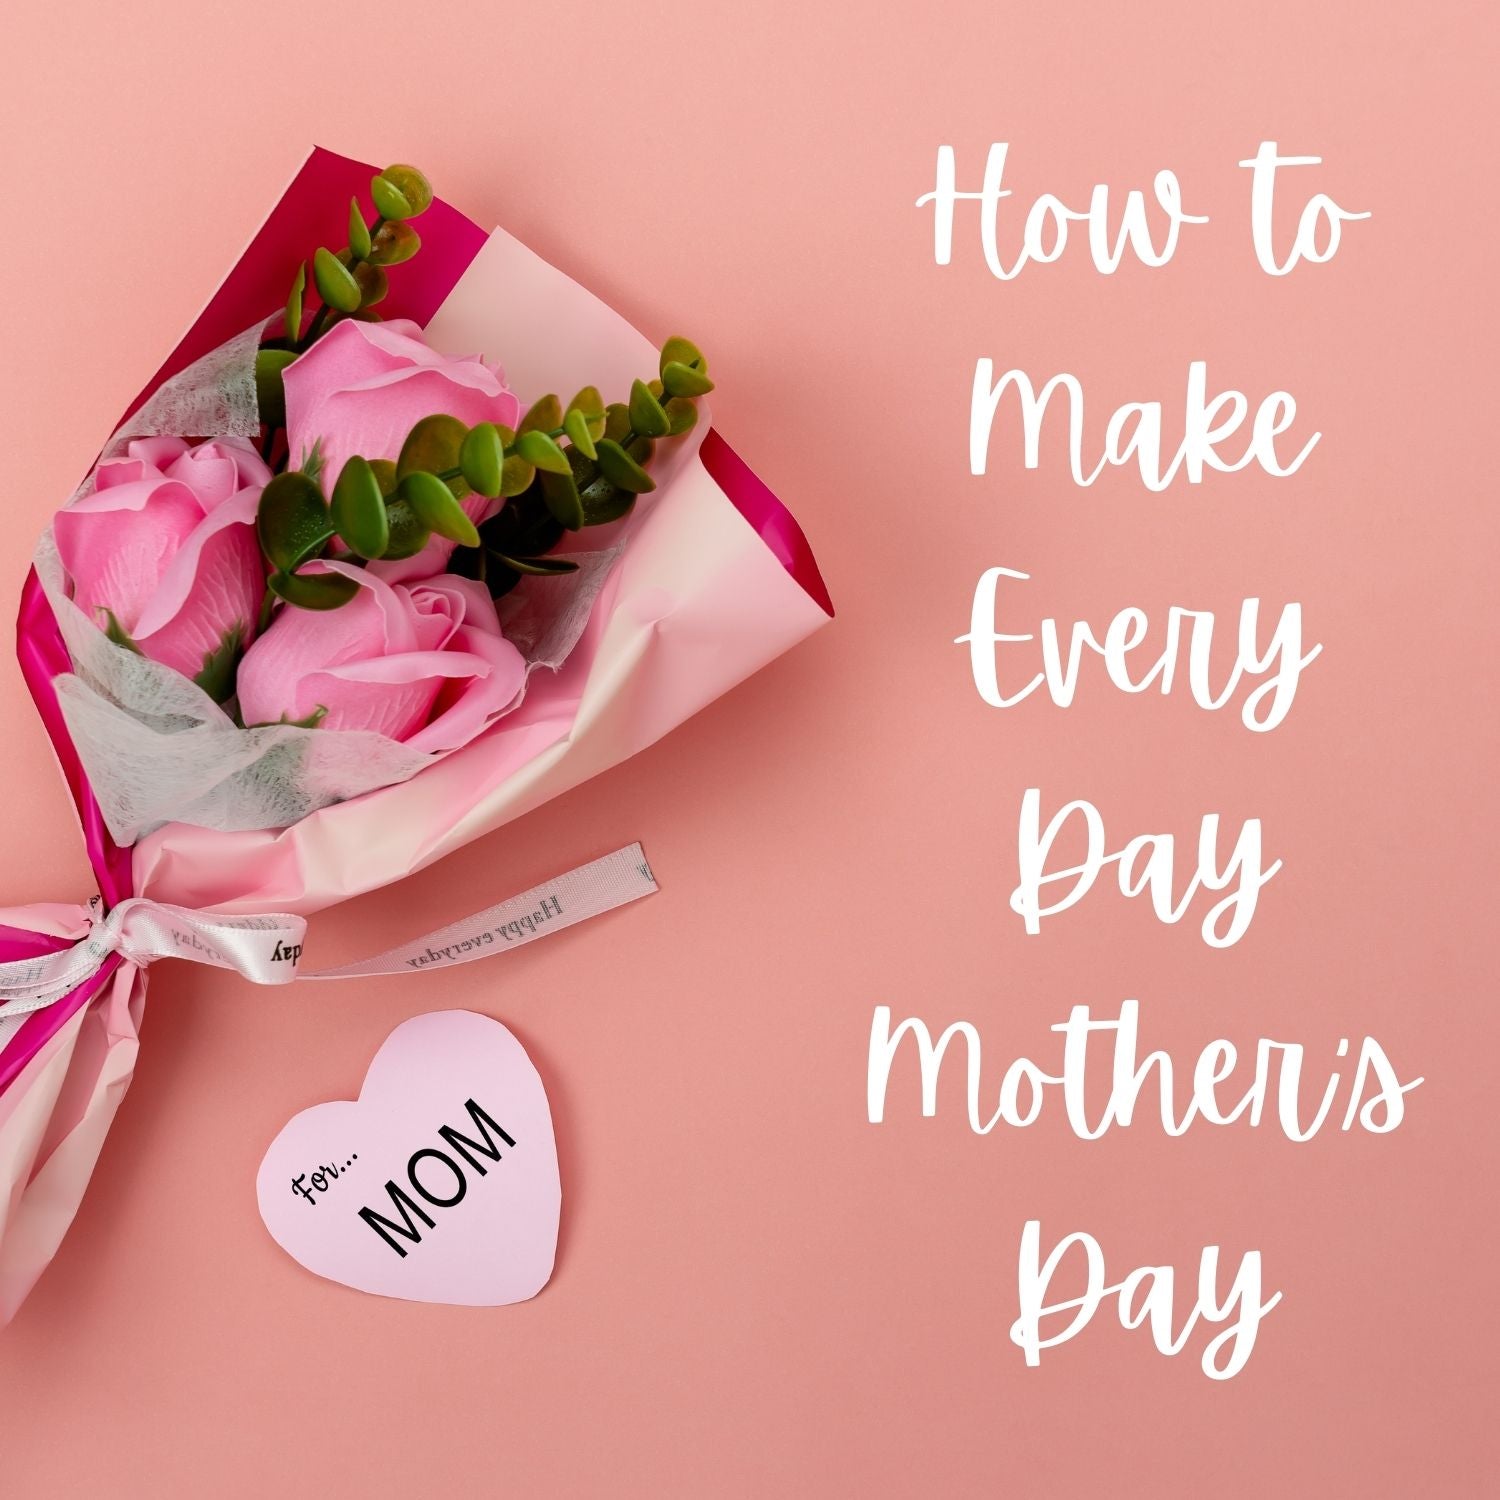 How To Make Mother's Day Every Day